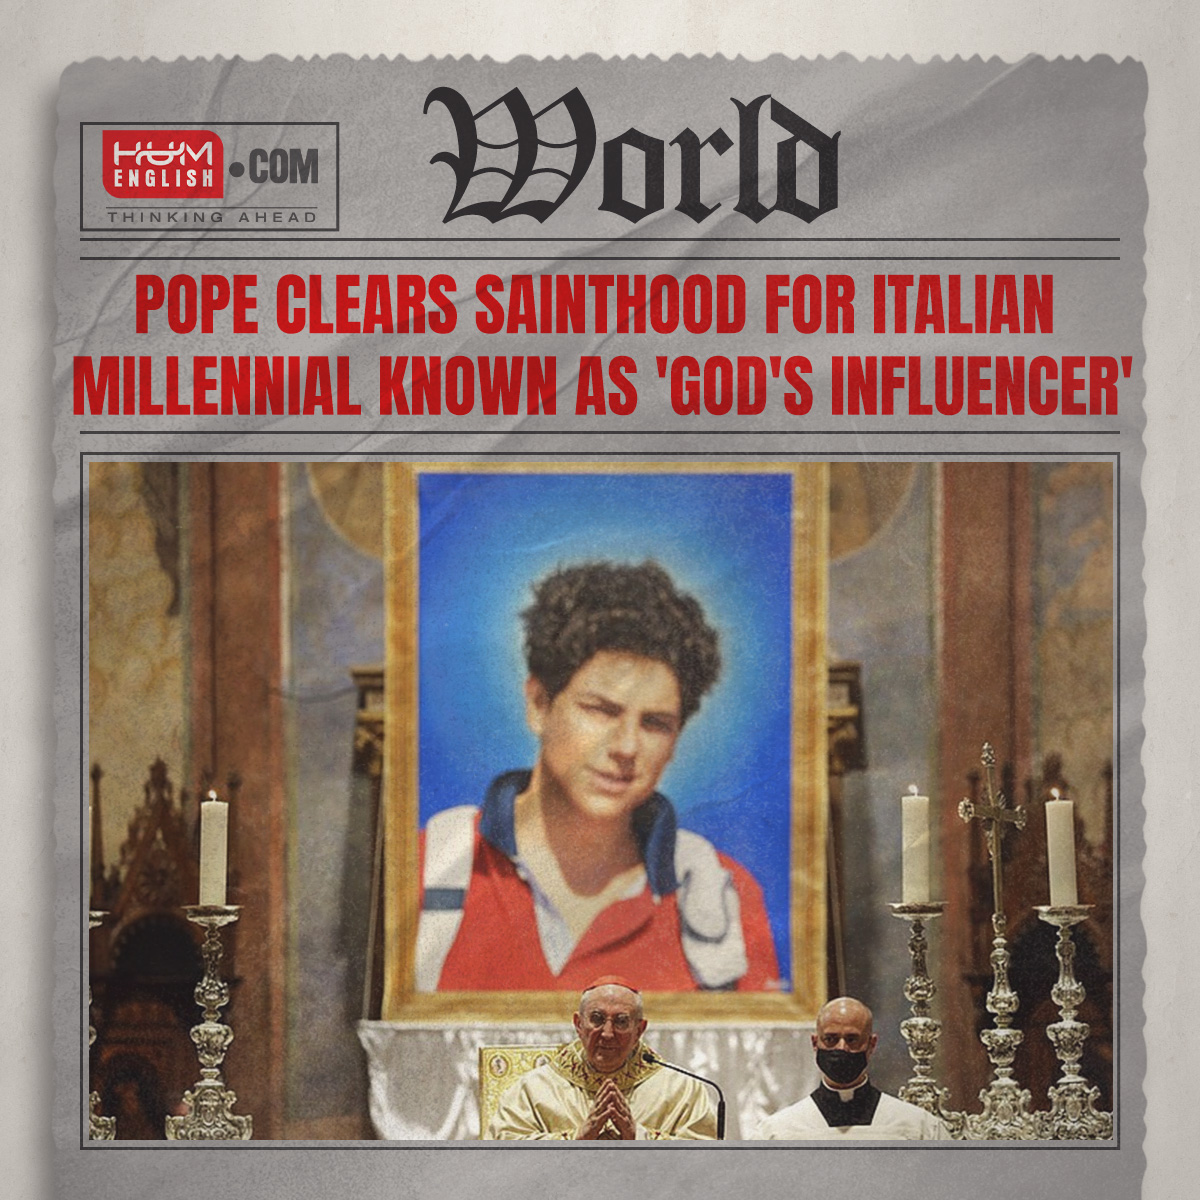 Pope clears sainthood for millennial known as 'God's influencer'

Read more: ow.ly/AT6a50RSmZp